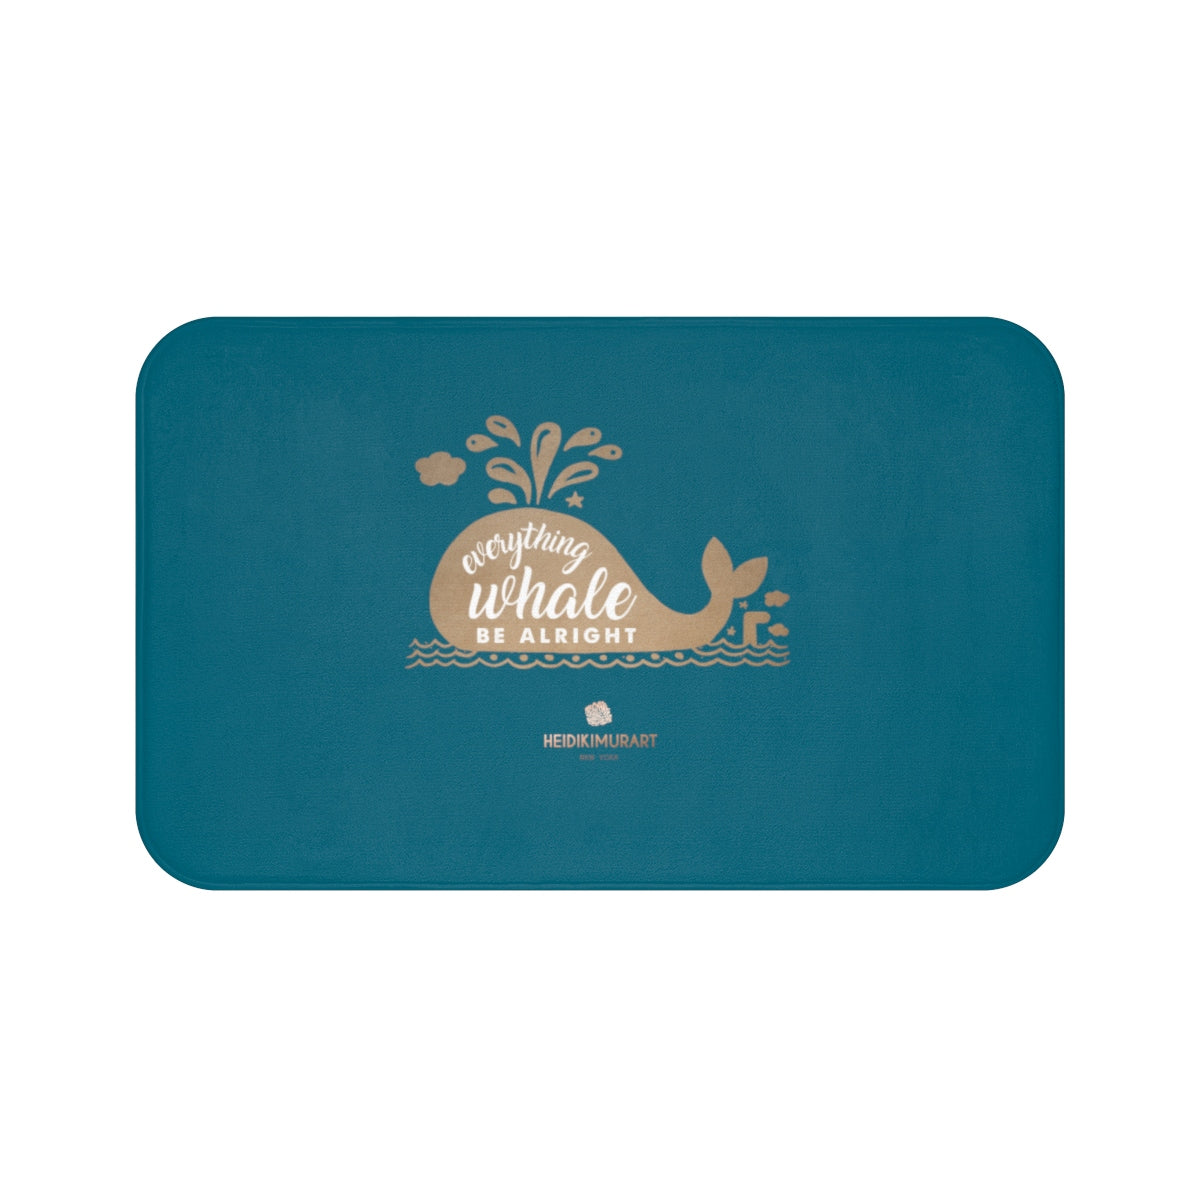 Teal Blue "Everything Whale Be Alright", Inspirational Quote Bath Mat- Printed in USA-Bath Mat-Large 34x21-Heidi Kimura Art LLC